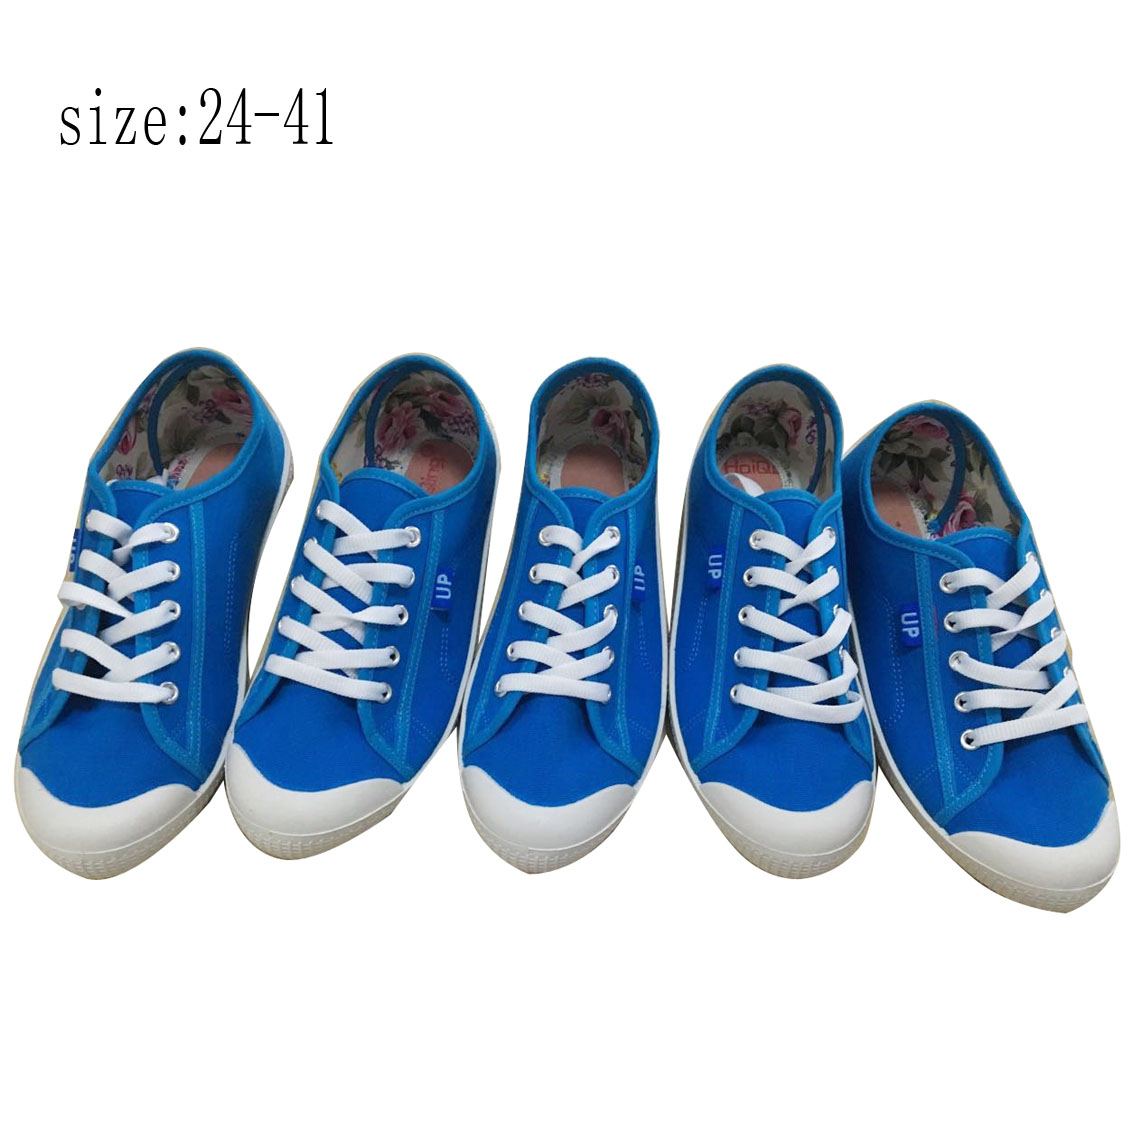 New design women casual shoes canvas shoes (HP19517-8) 1. ITEM...